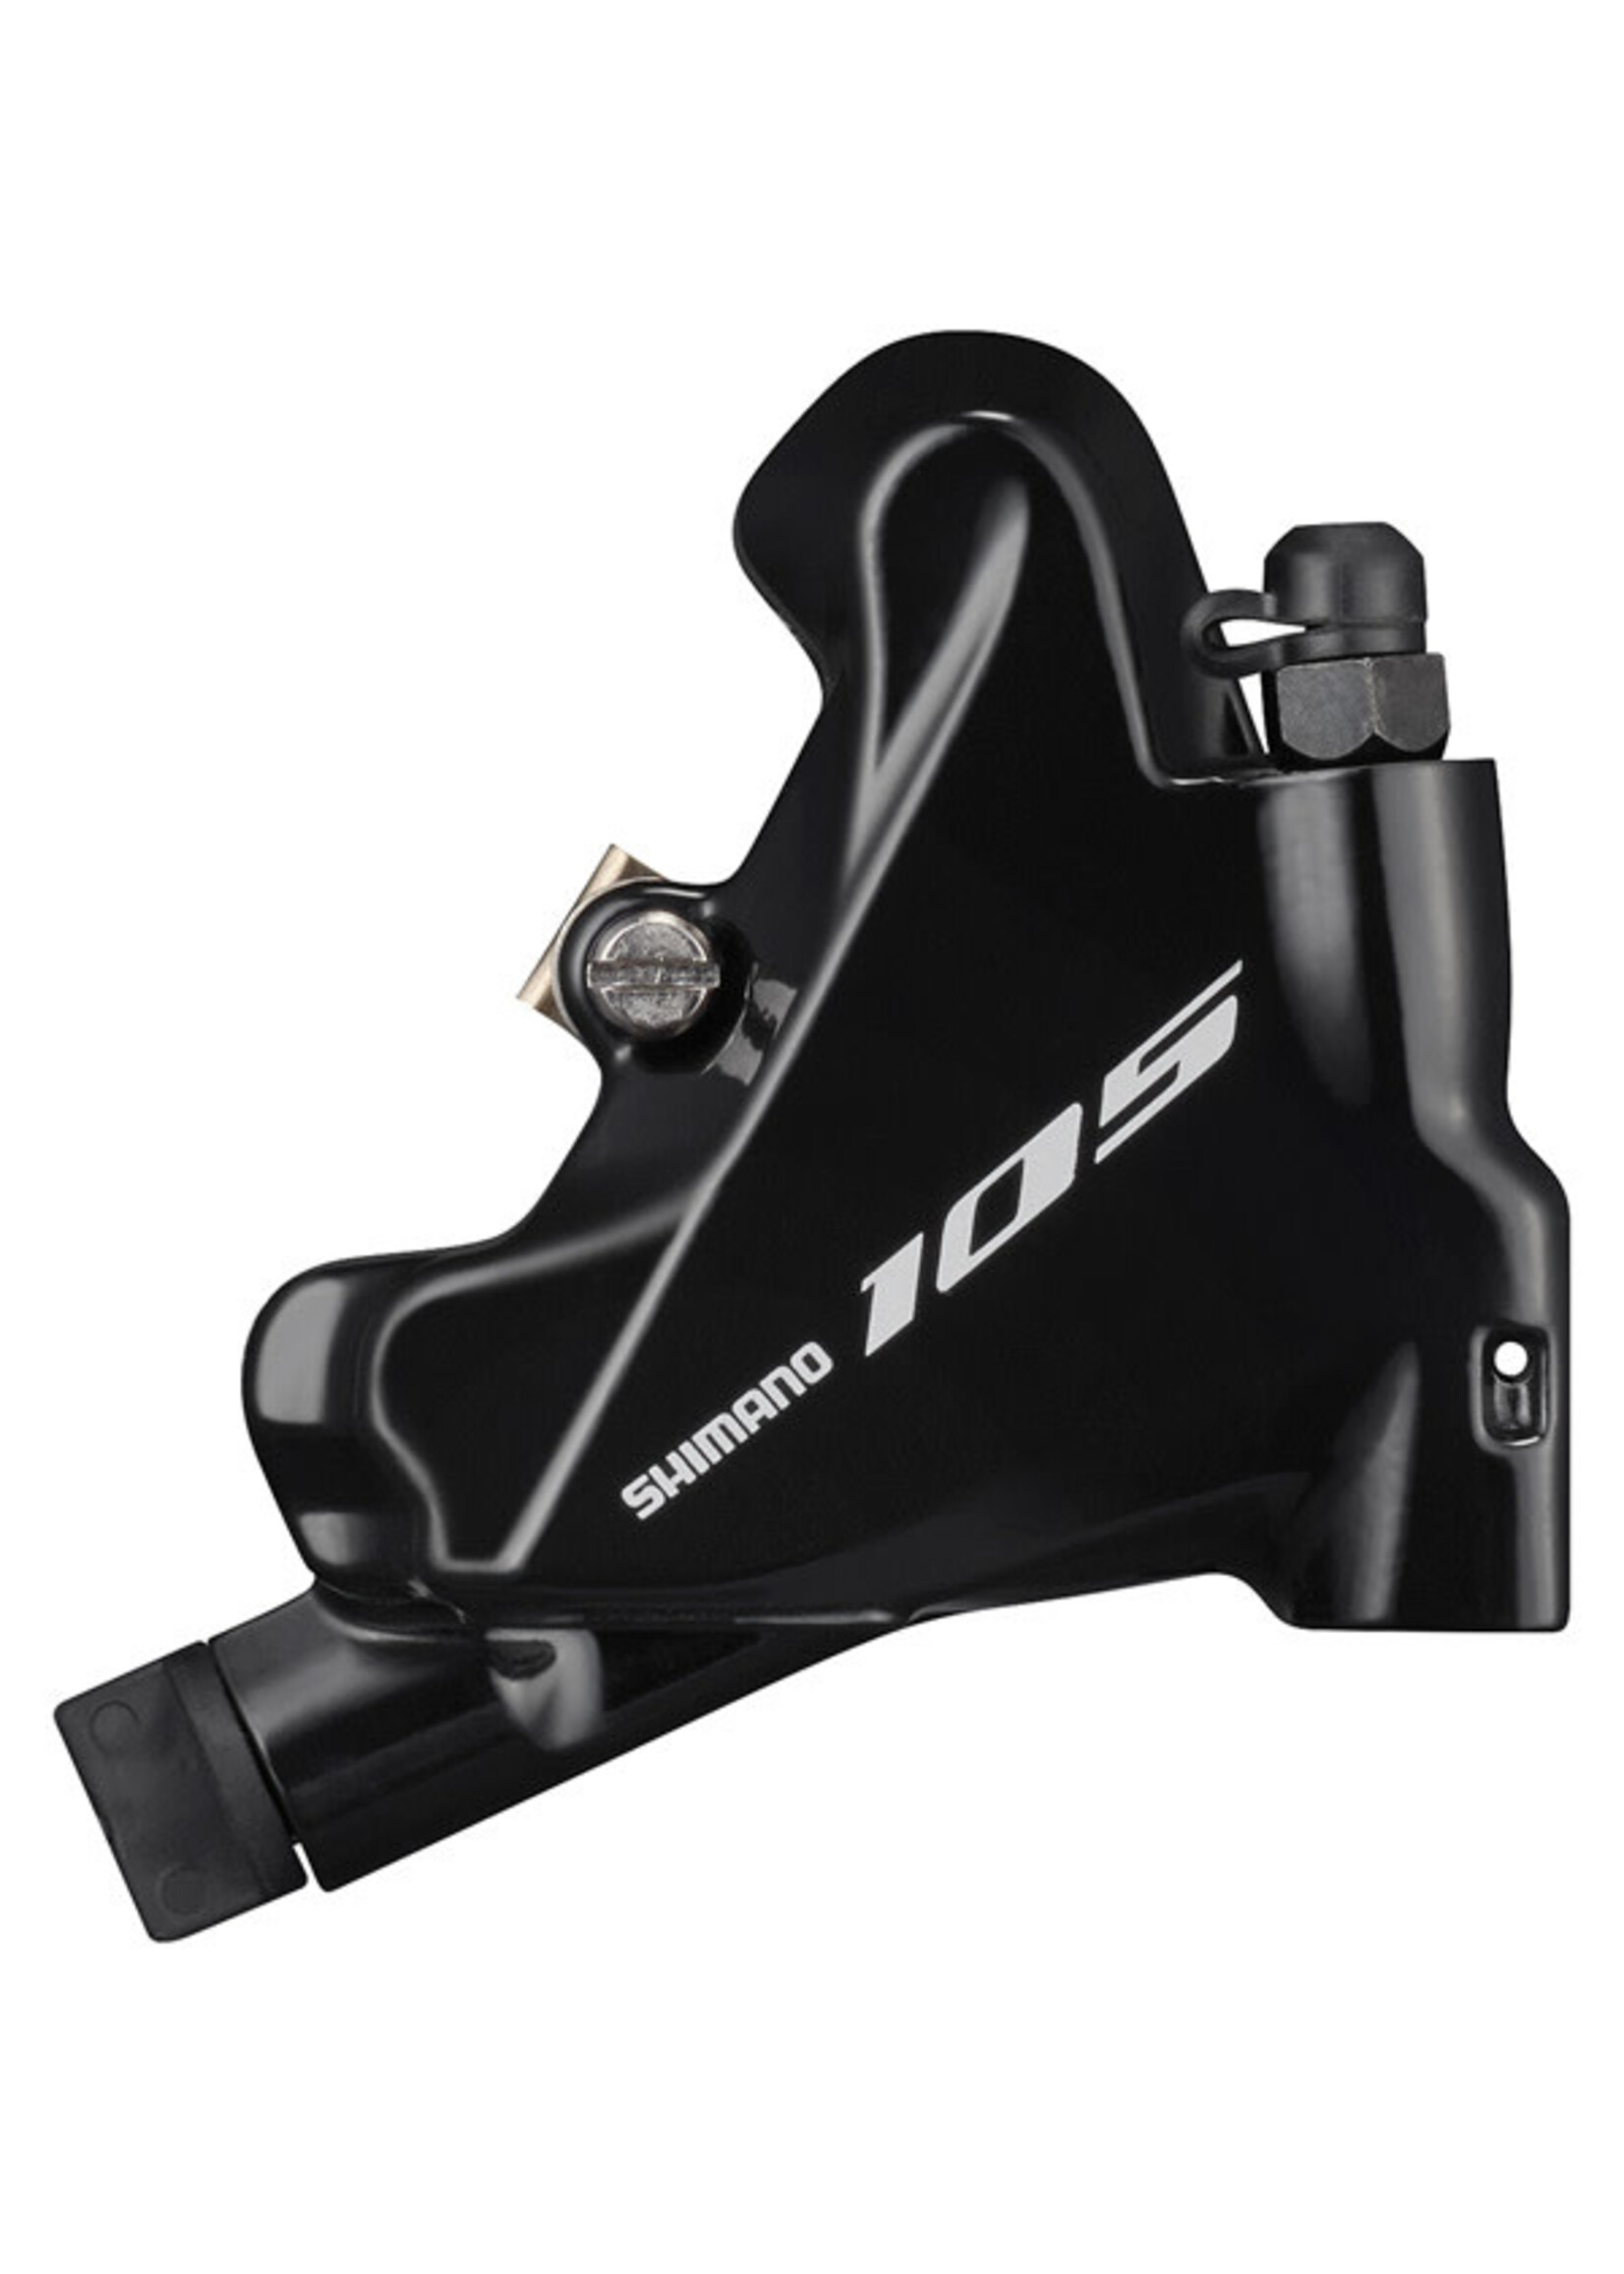 Shimano Shimano BR-R7070 105 flat mount calliper, without rotor or adapters, rear, black